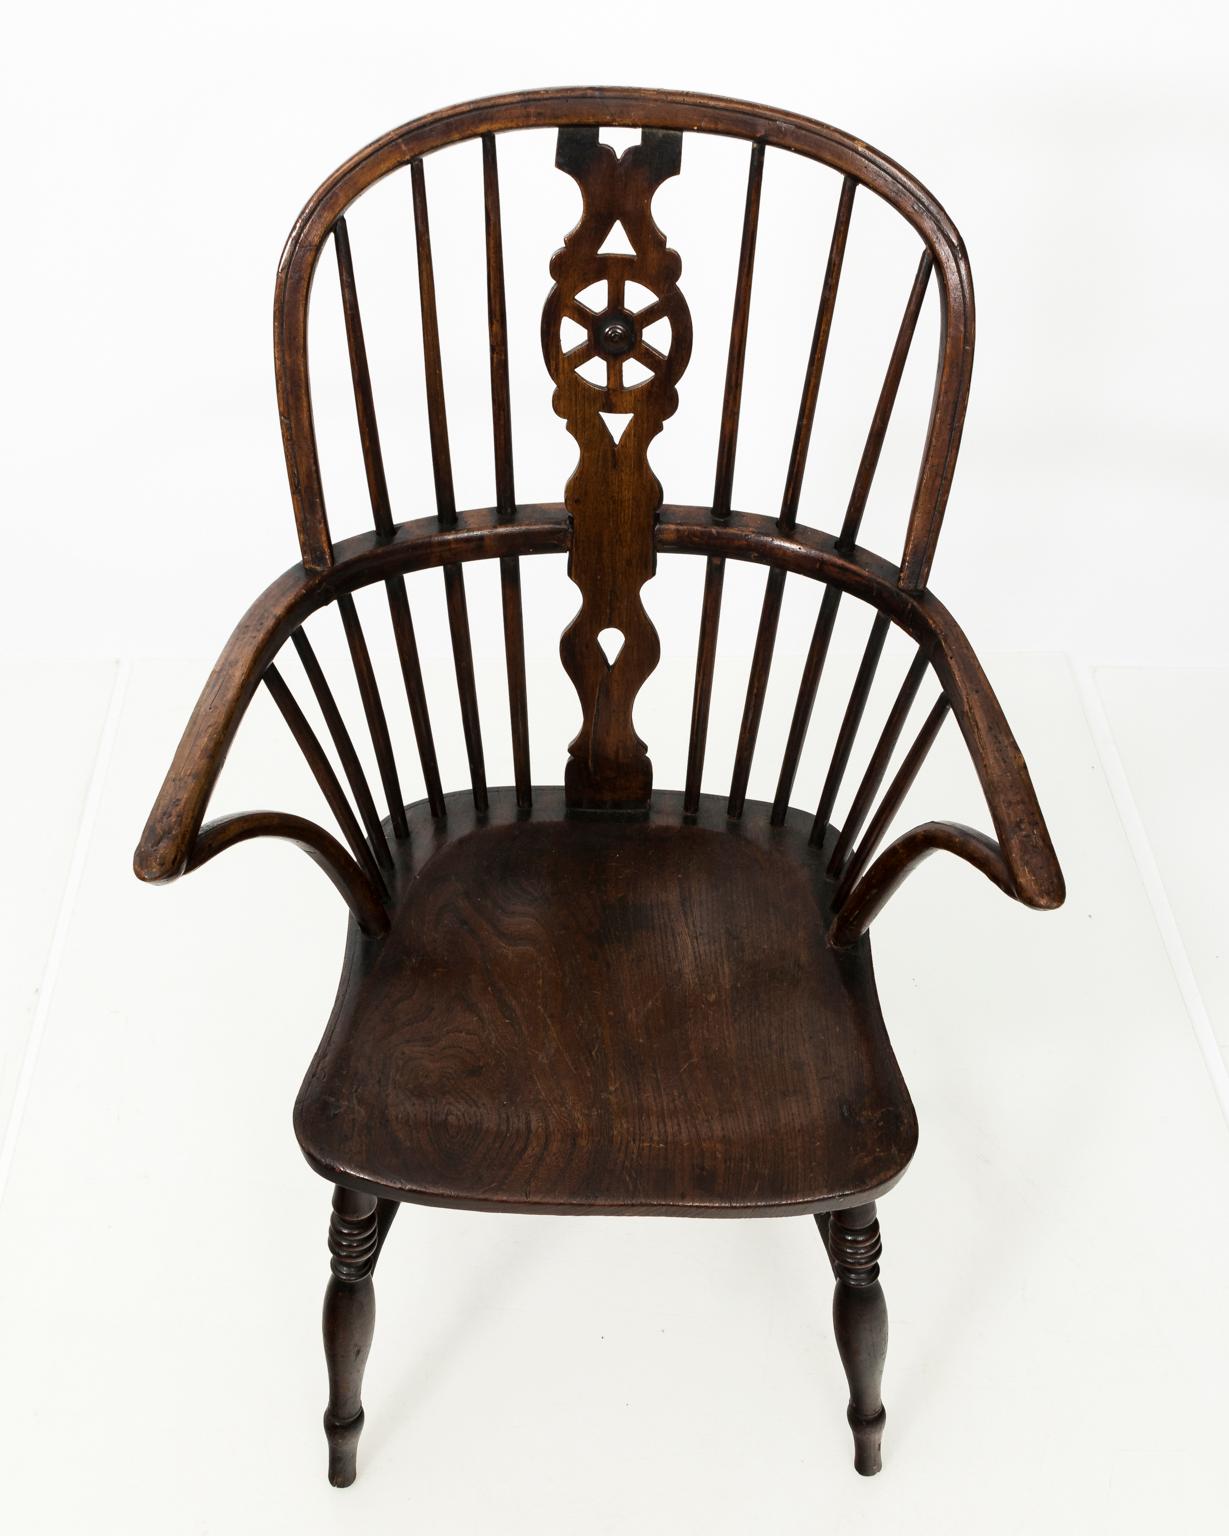 Windsor style comb-back armchair with a pinwheel design on the pierced back splat. The legs also feature ring turnings with an h-shaped cross stretcher, circa 19th century.
 